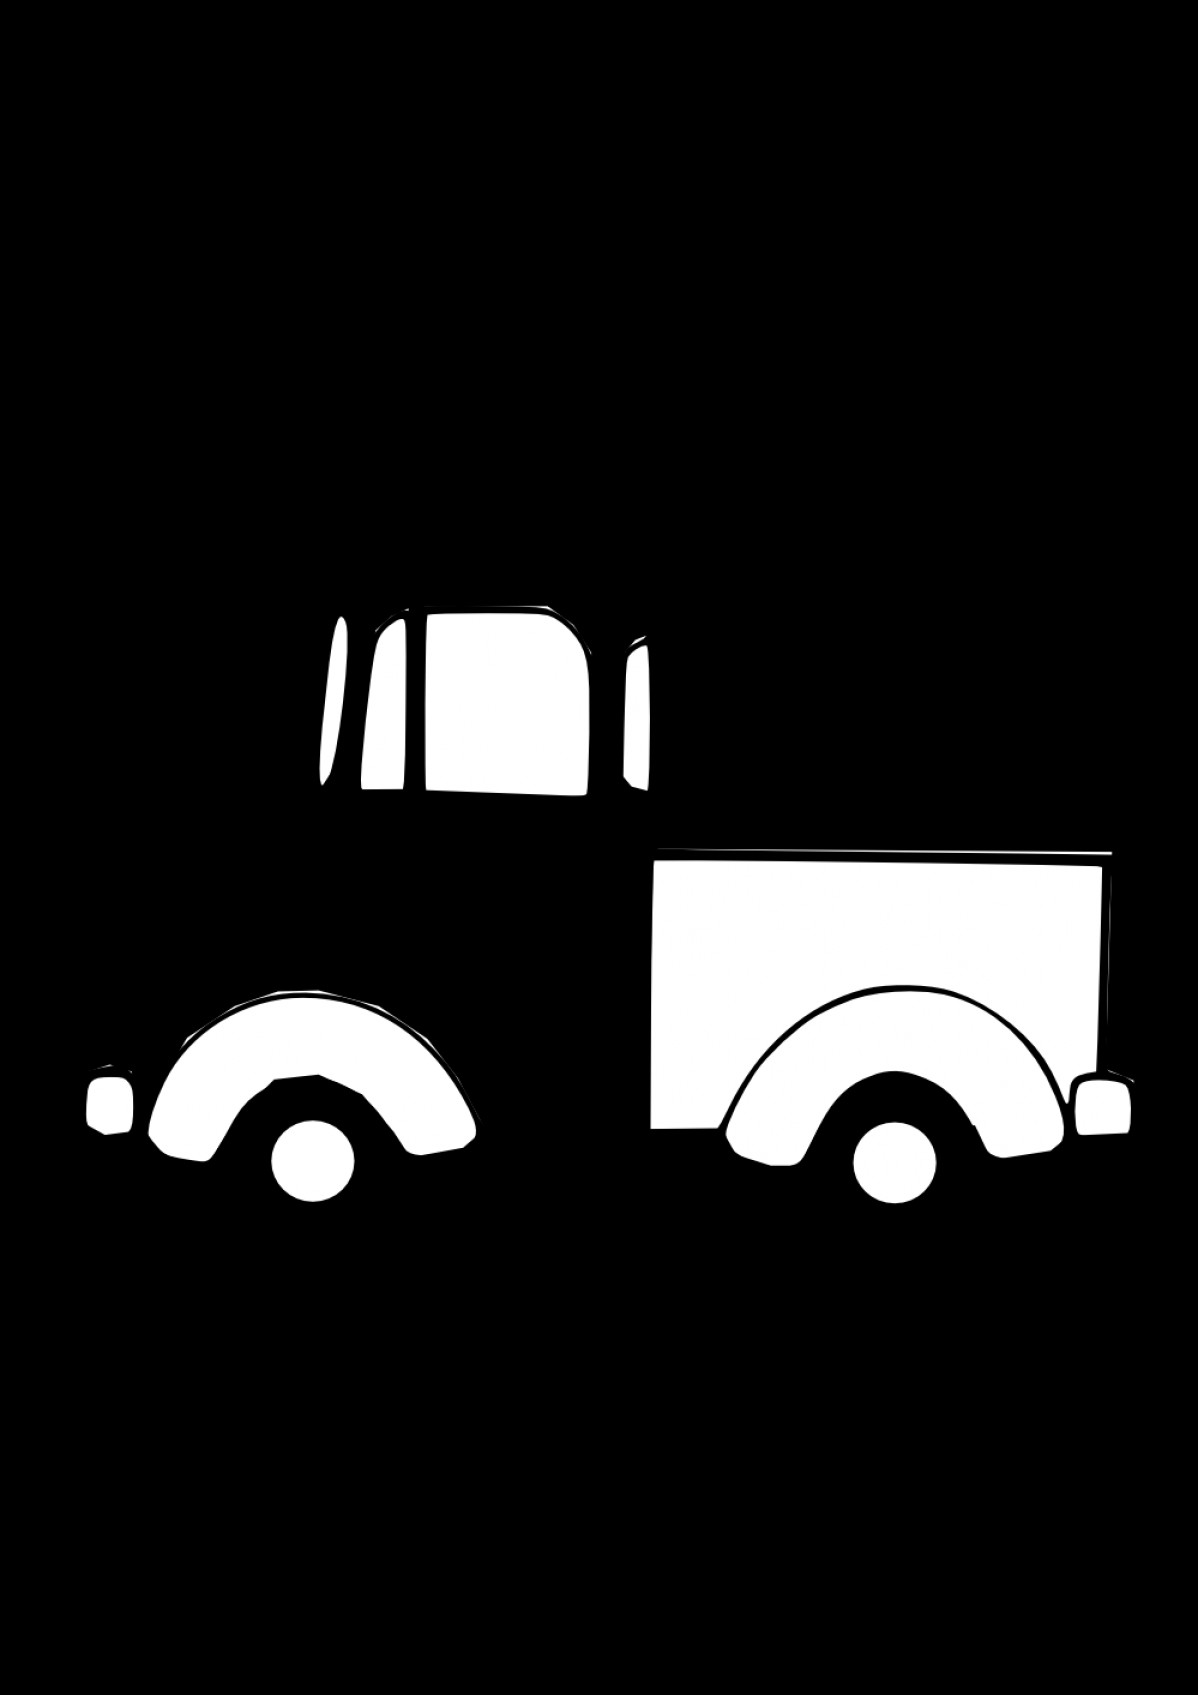 Exclusive Monster Truck Clip Art Black And White Illustration